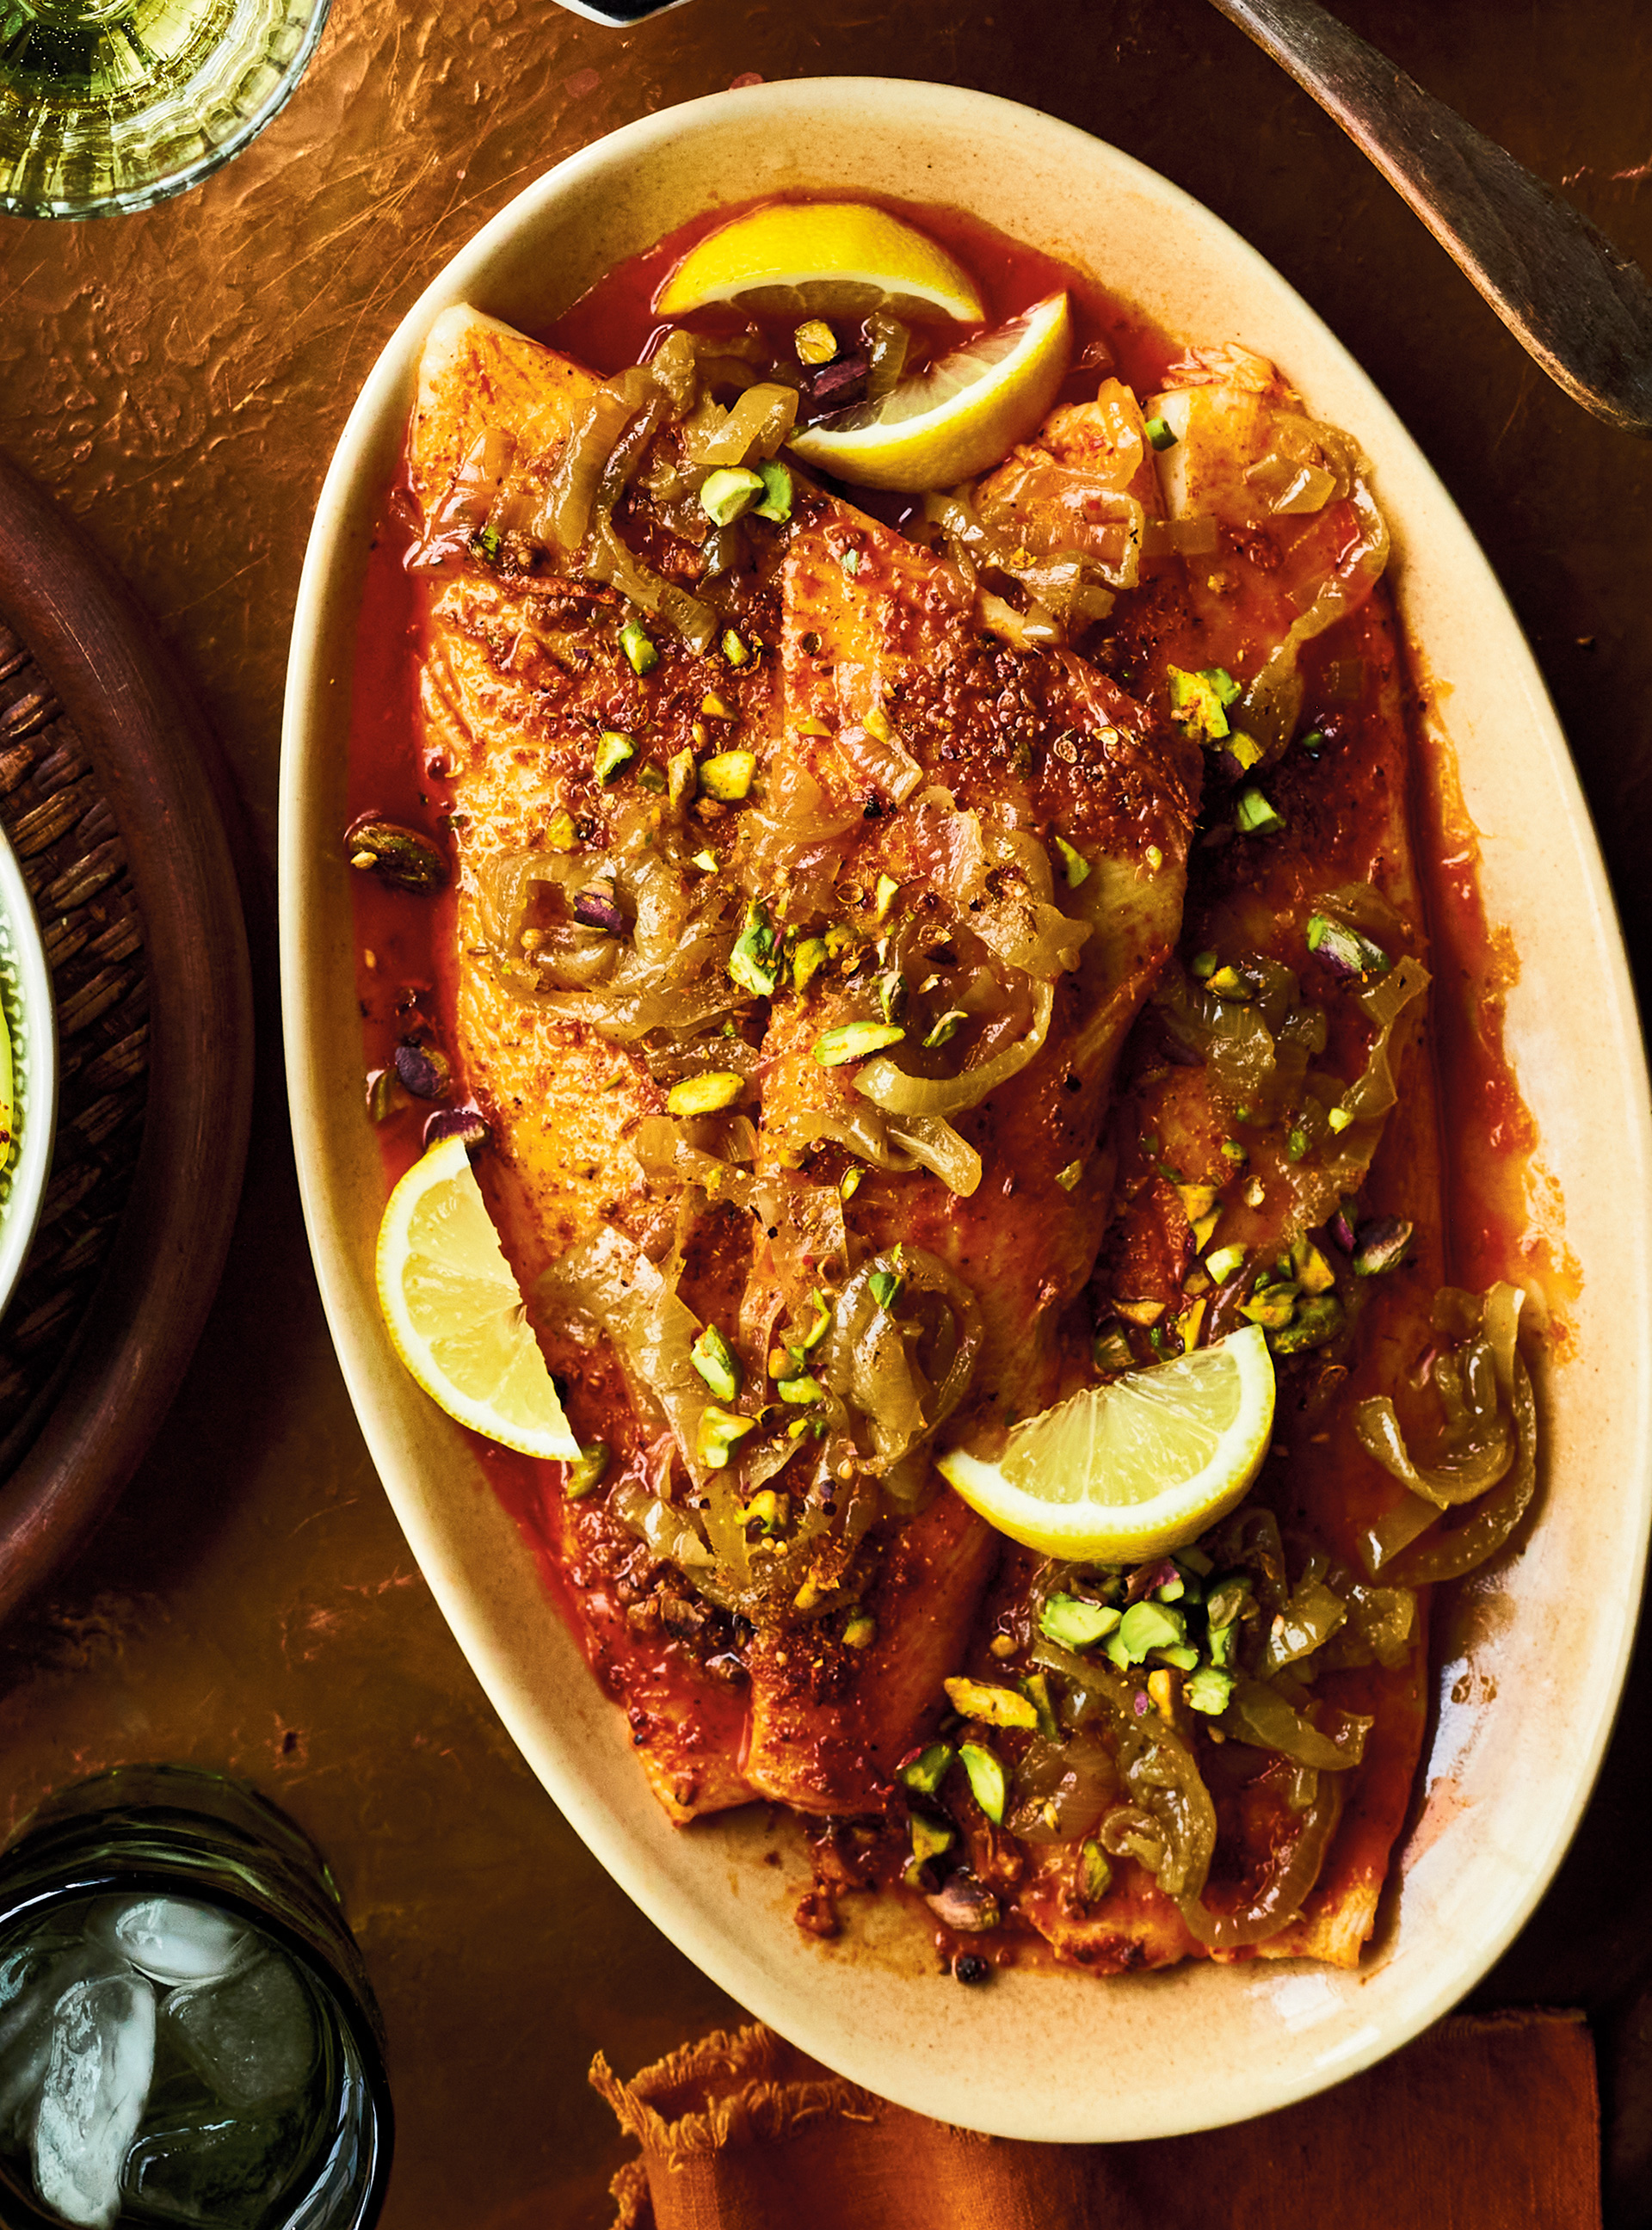 Ethné de Vienne’s Roasted Fish Fillets with Portuguese Spices and Onion Sofrito